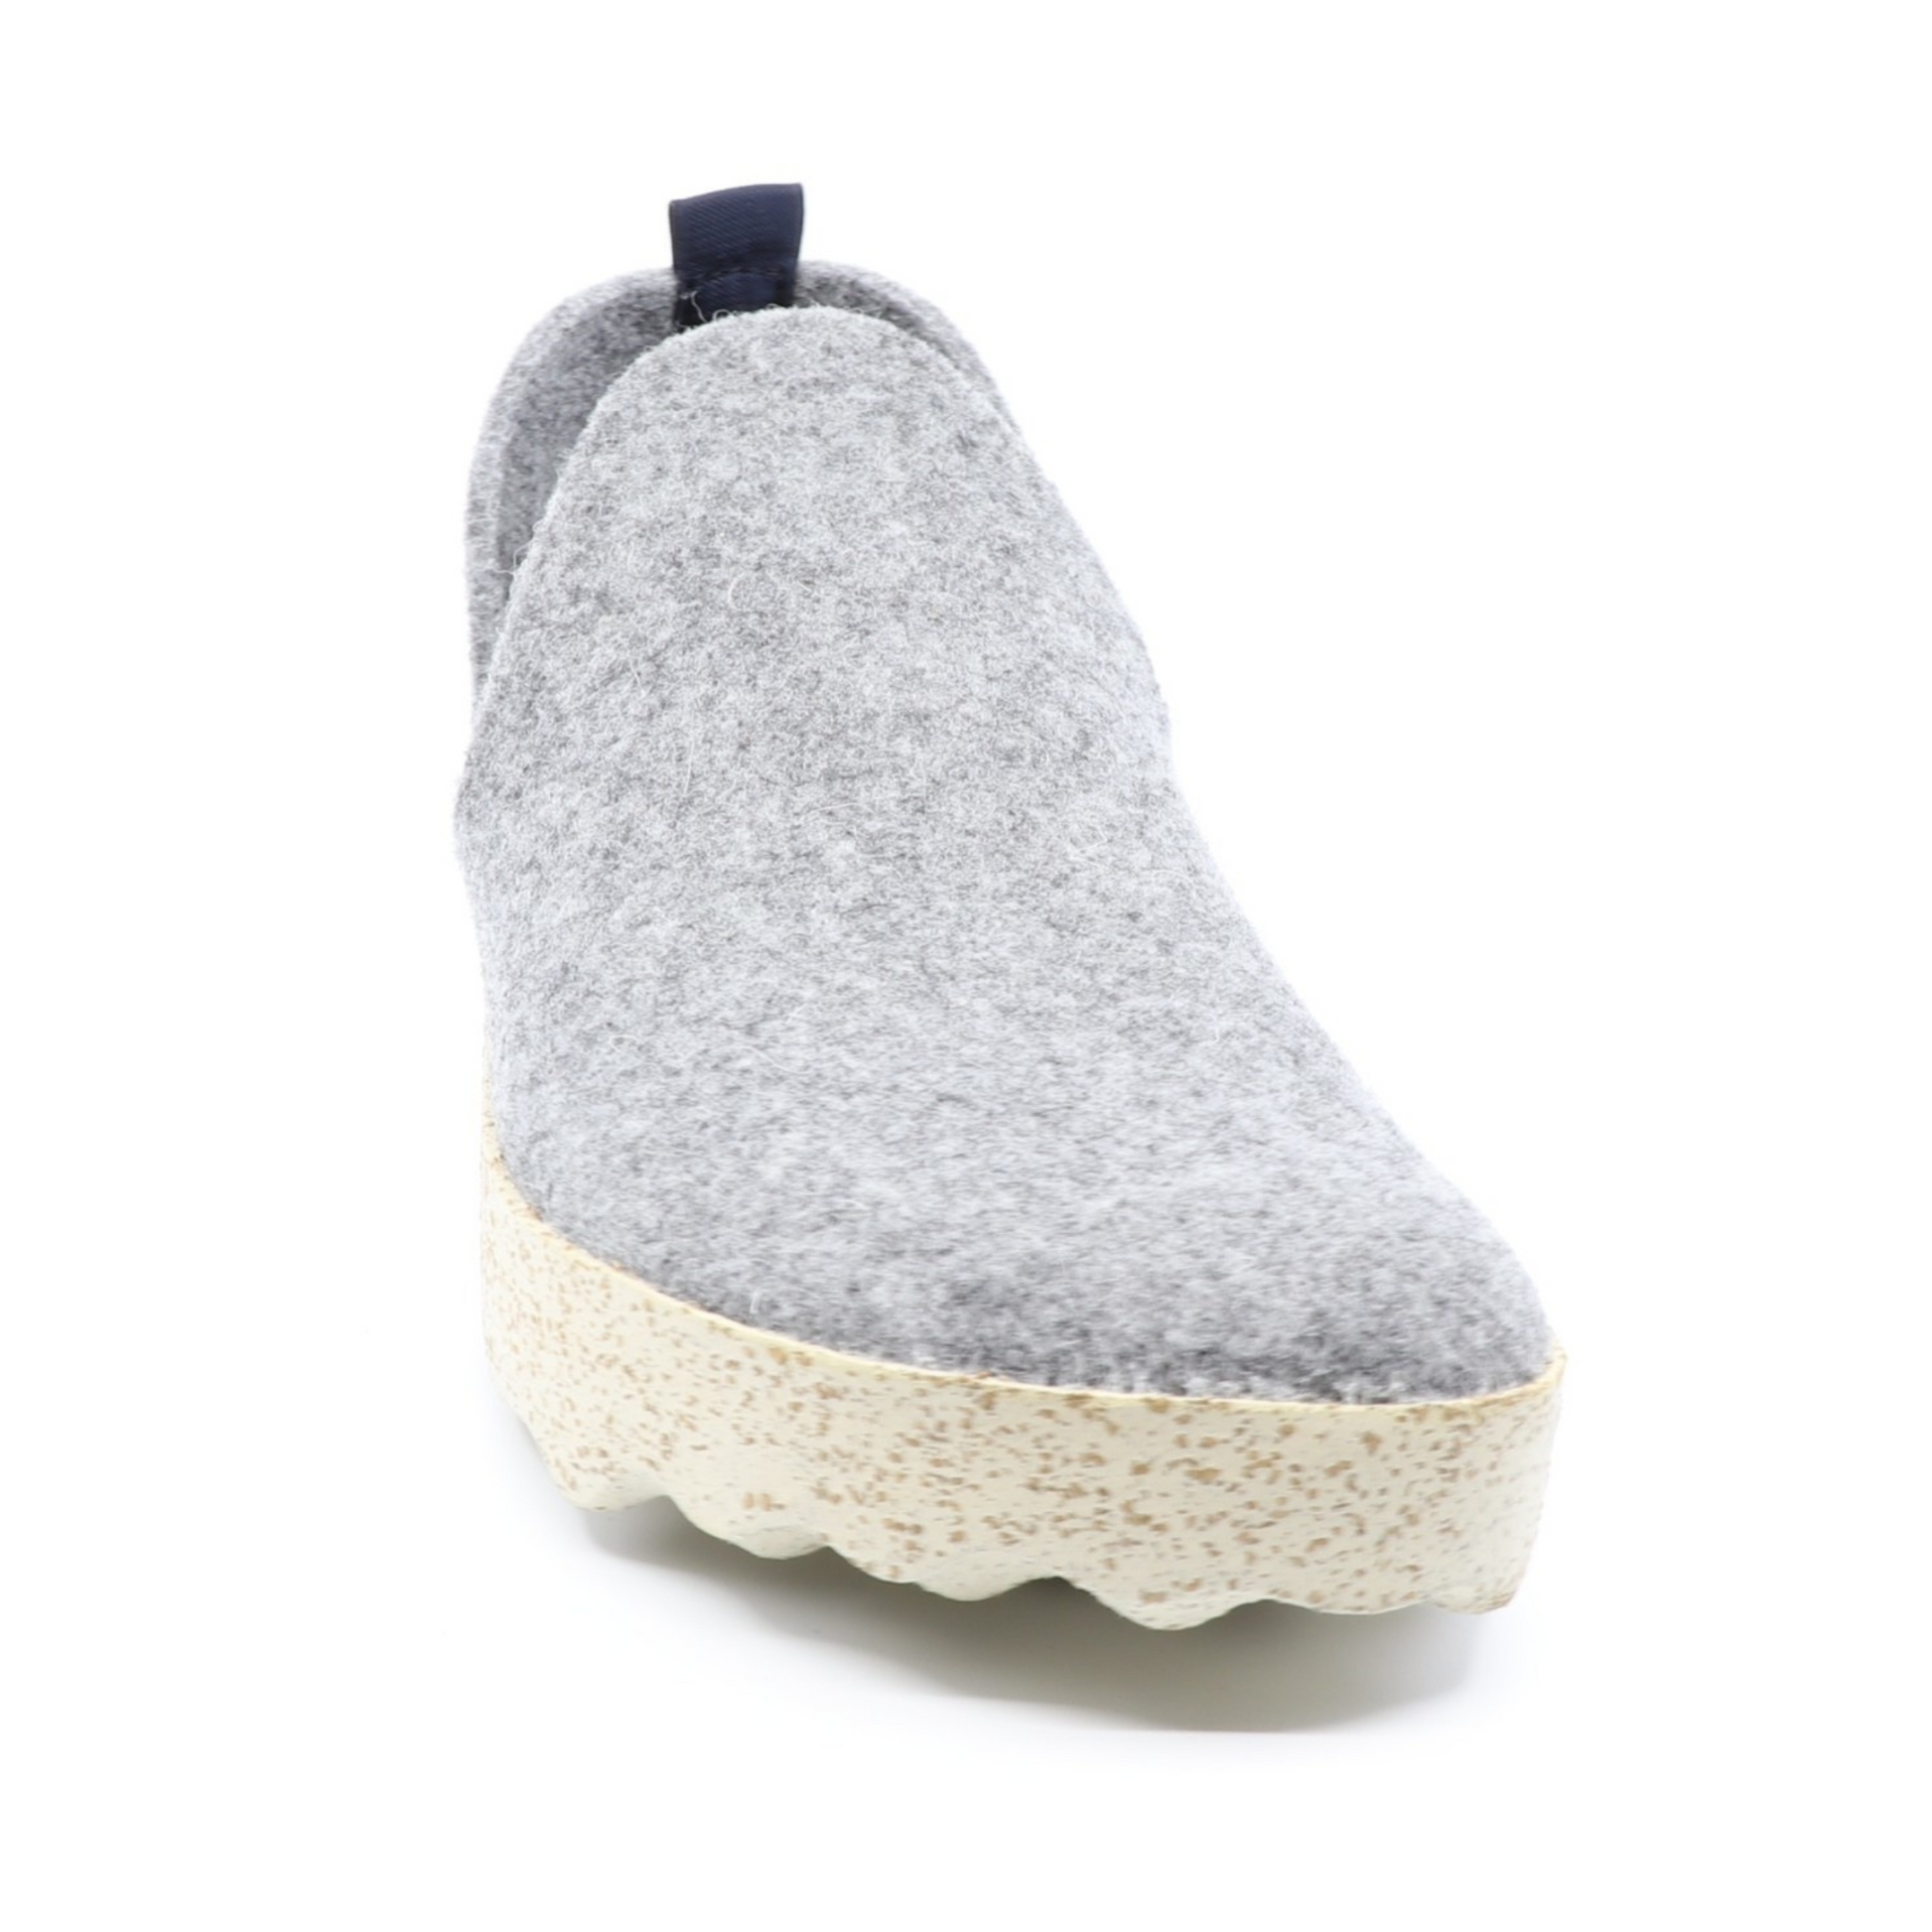 A light grey wool sneaker with navy heel tab and cream cork soul is pictured from the front.